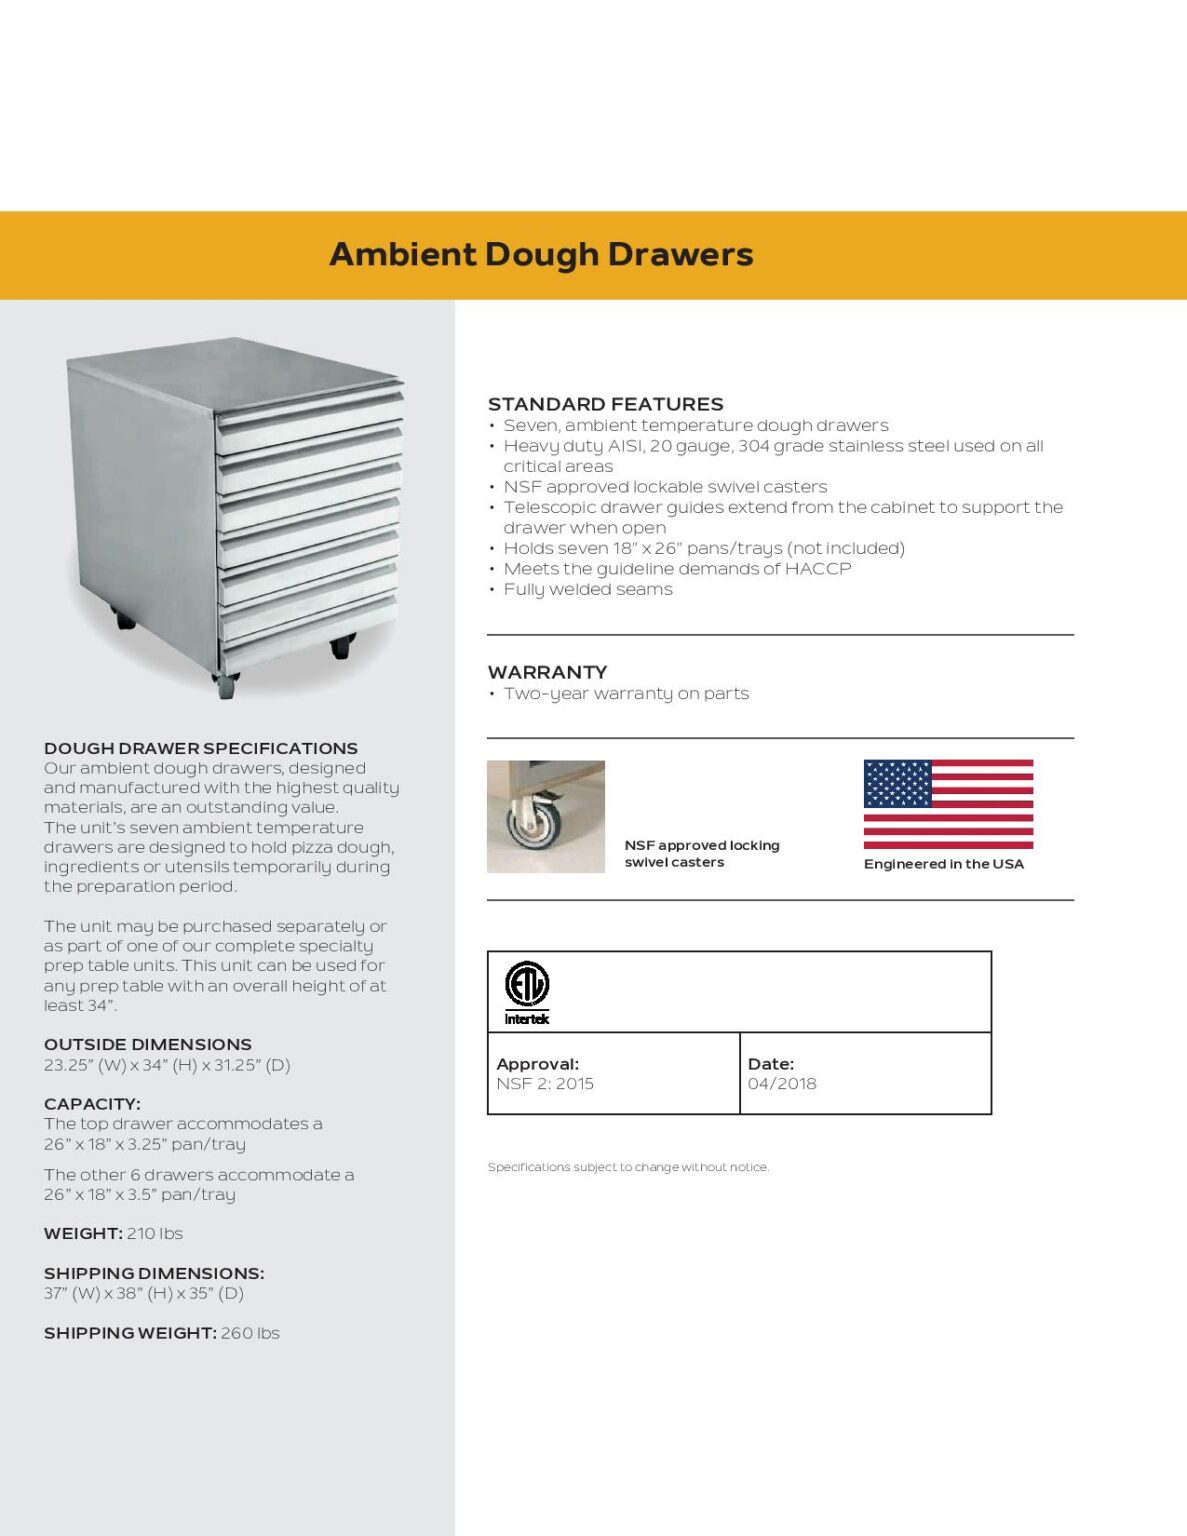 AWIC Ambient Dough Drawers